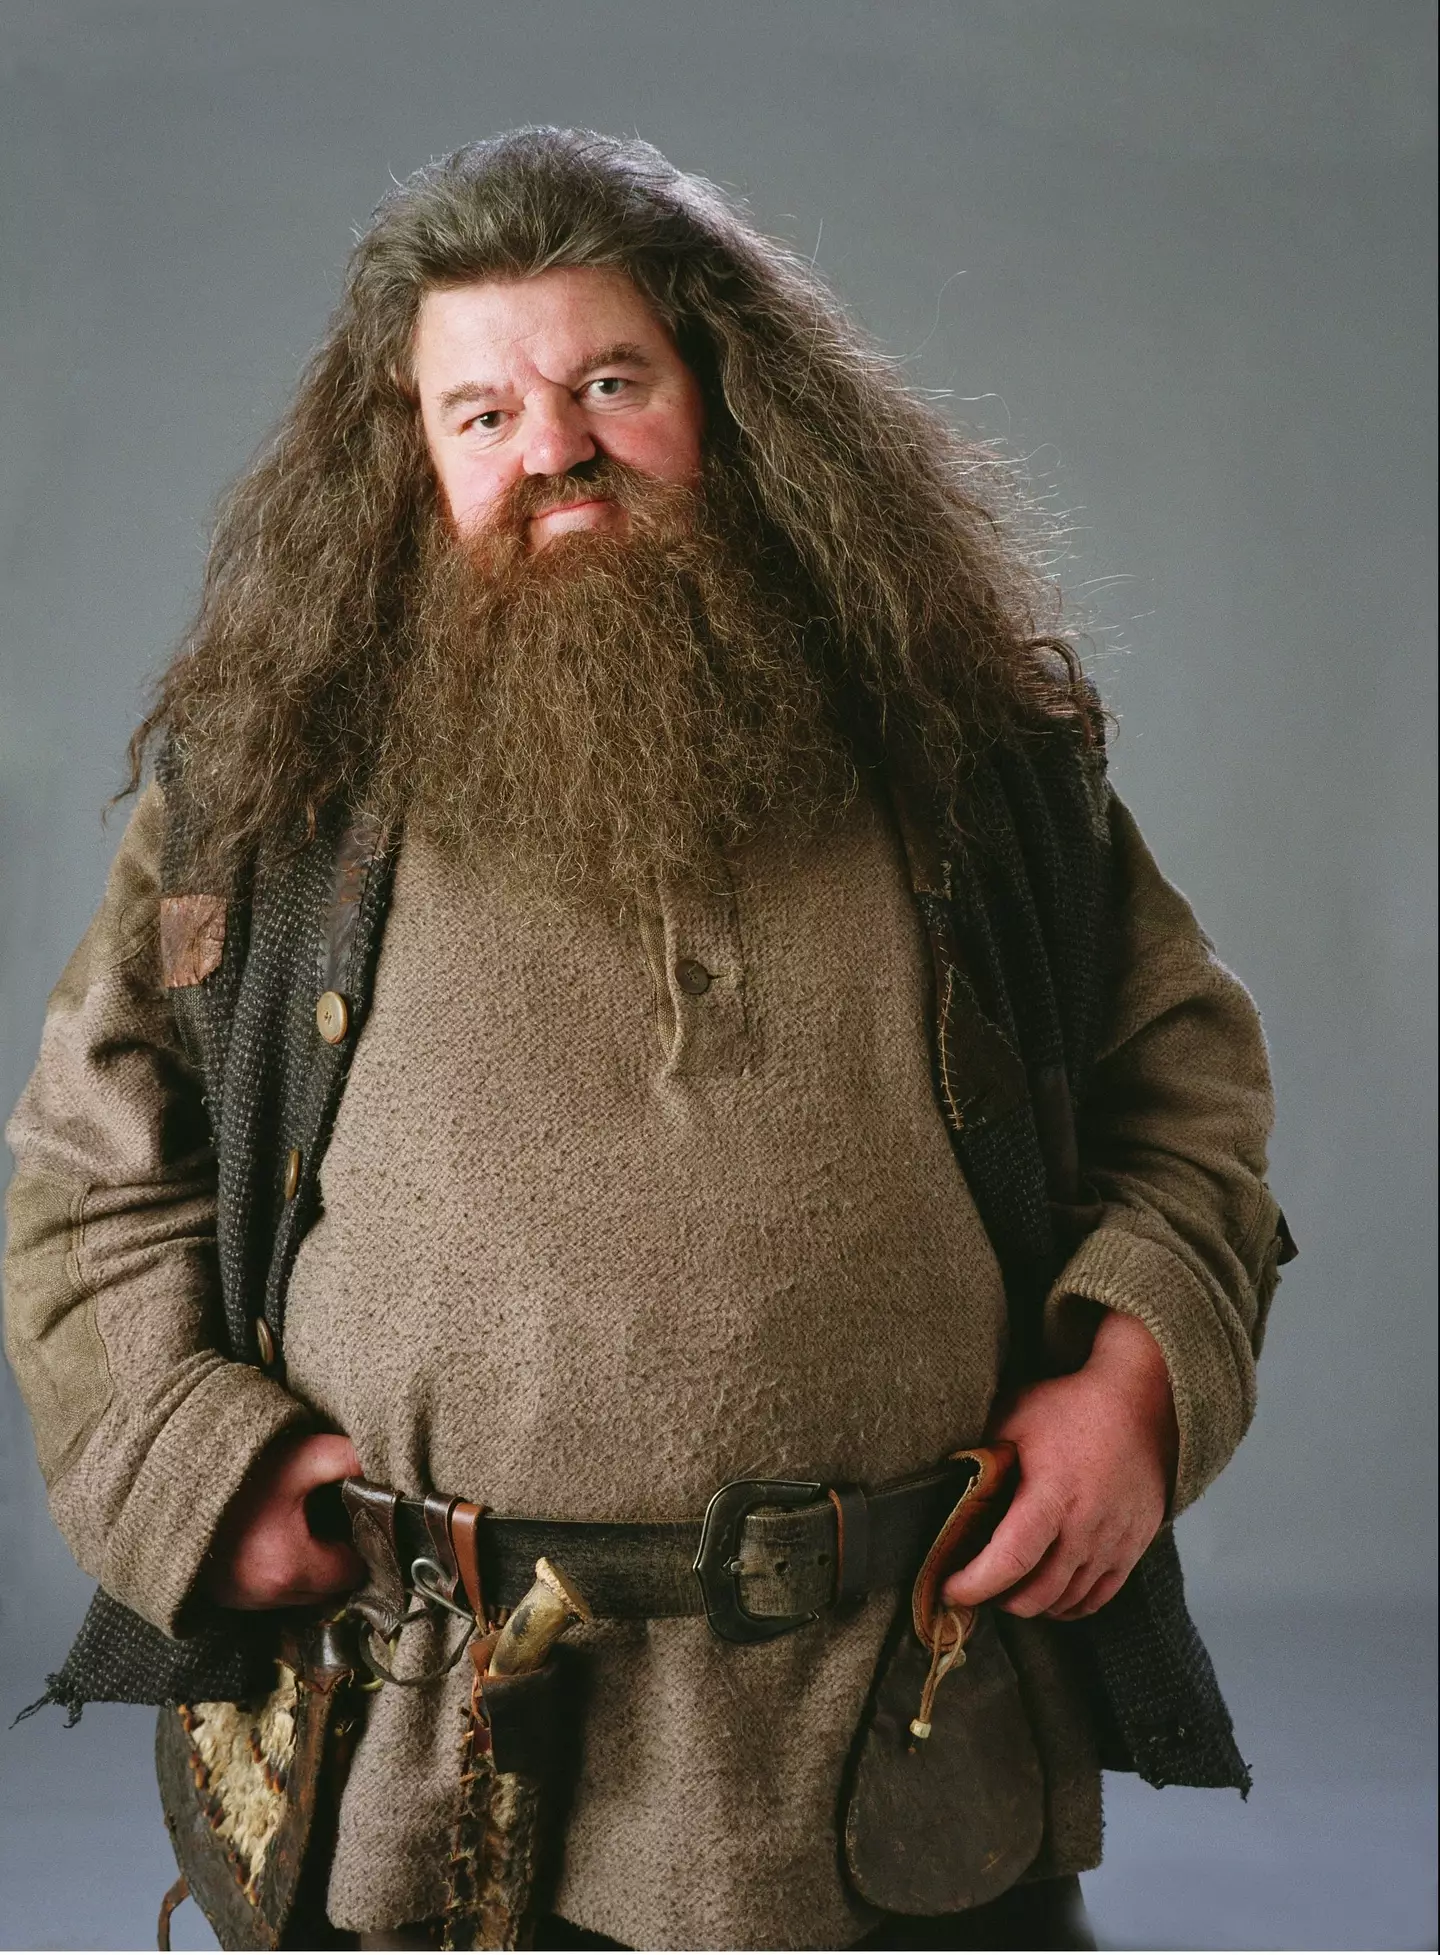 Fans will remember him as Hagrid in the Harry Potter franchise.